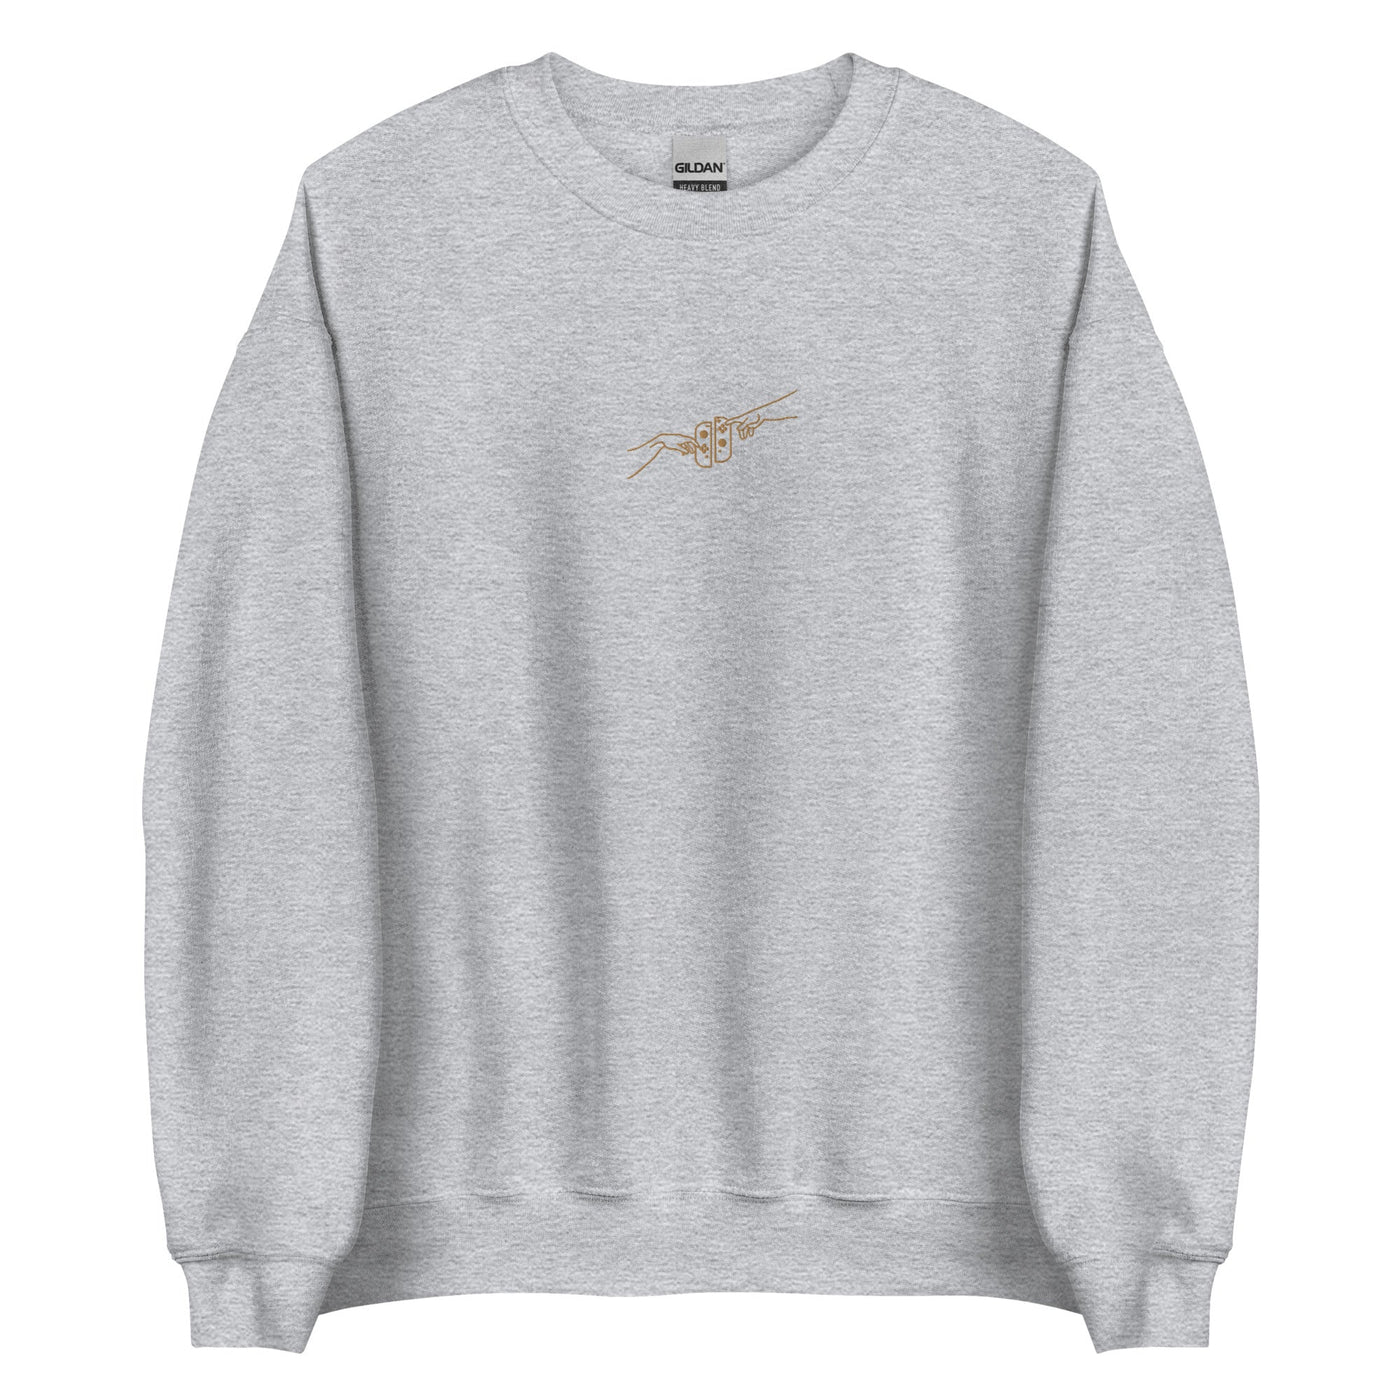 The Creation of Switch | Embroidered Unisex Sweatshirt | Cozy Gamer Threads and Thistles Inventory Sport Grey S 